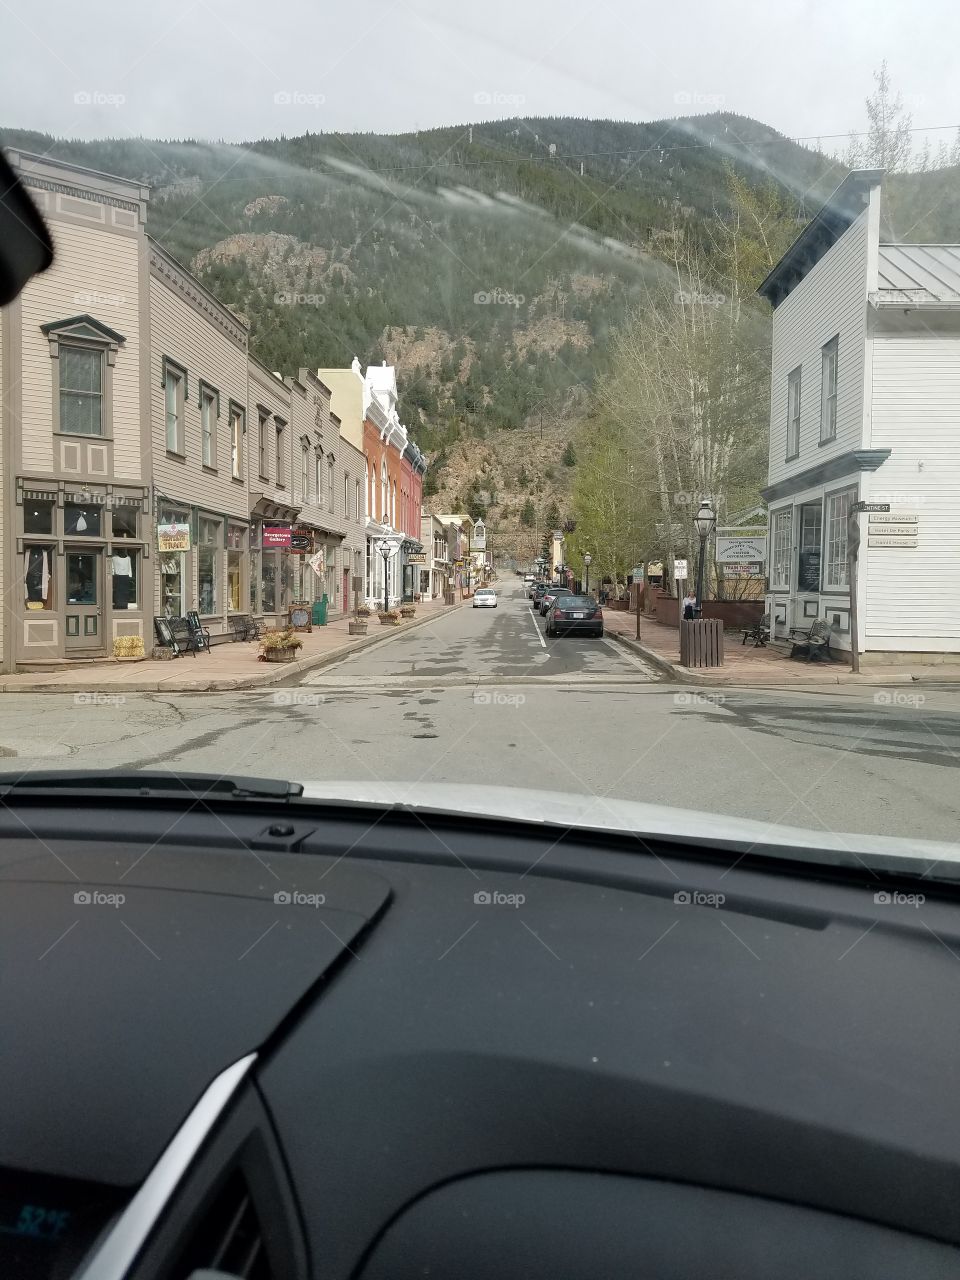 Small Town out West, Colorado